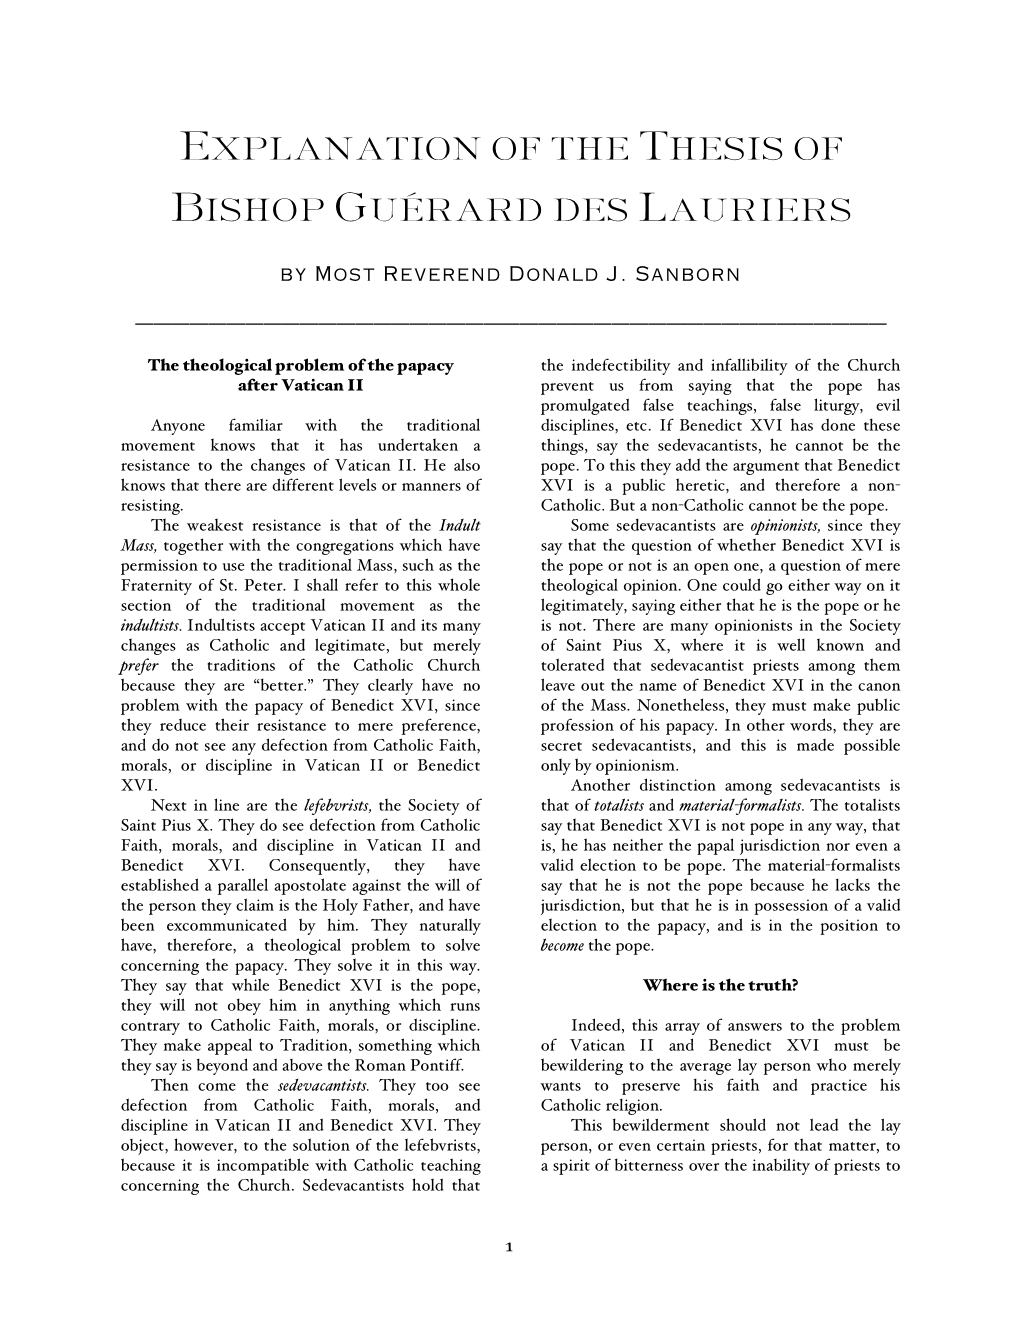 Explanation of the Thesis of Bishop Guérard Des Lauriers